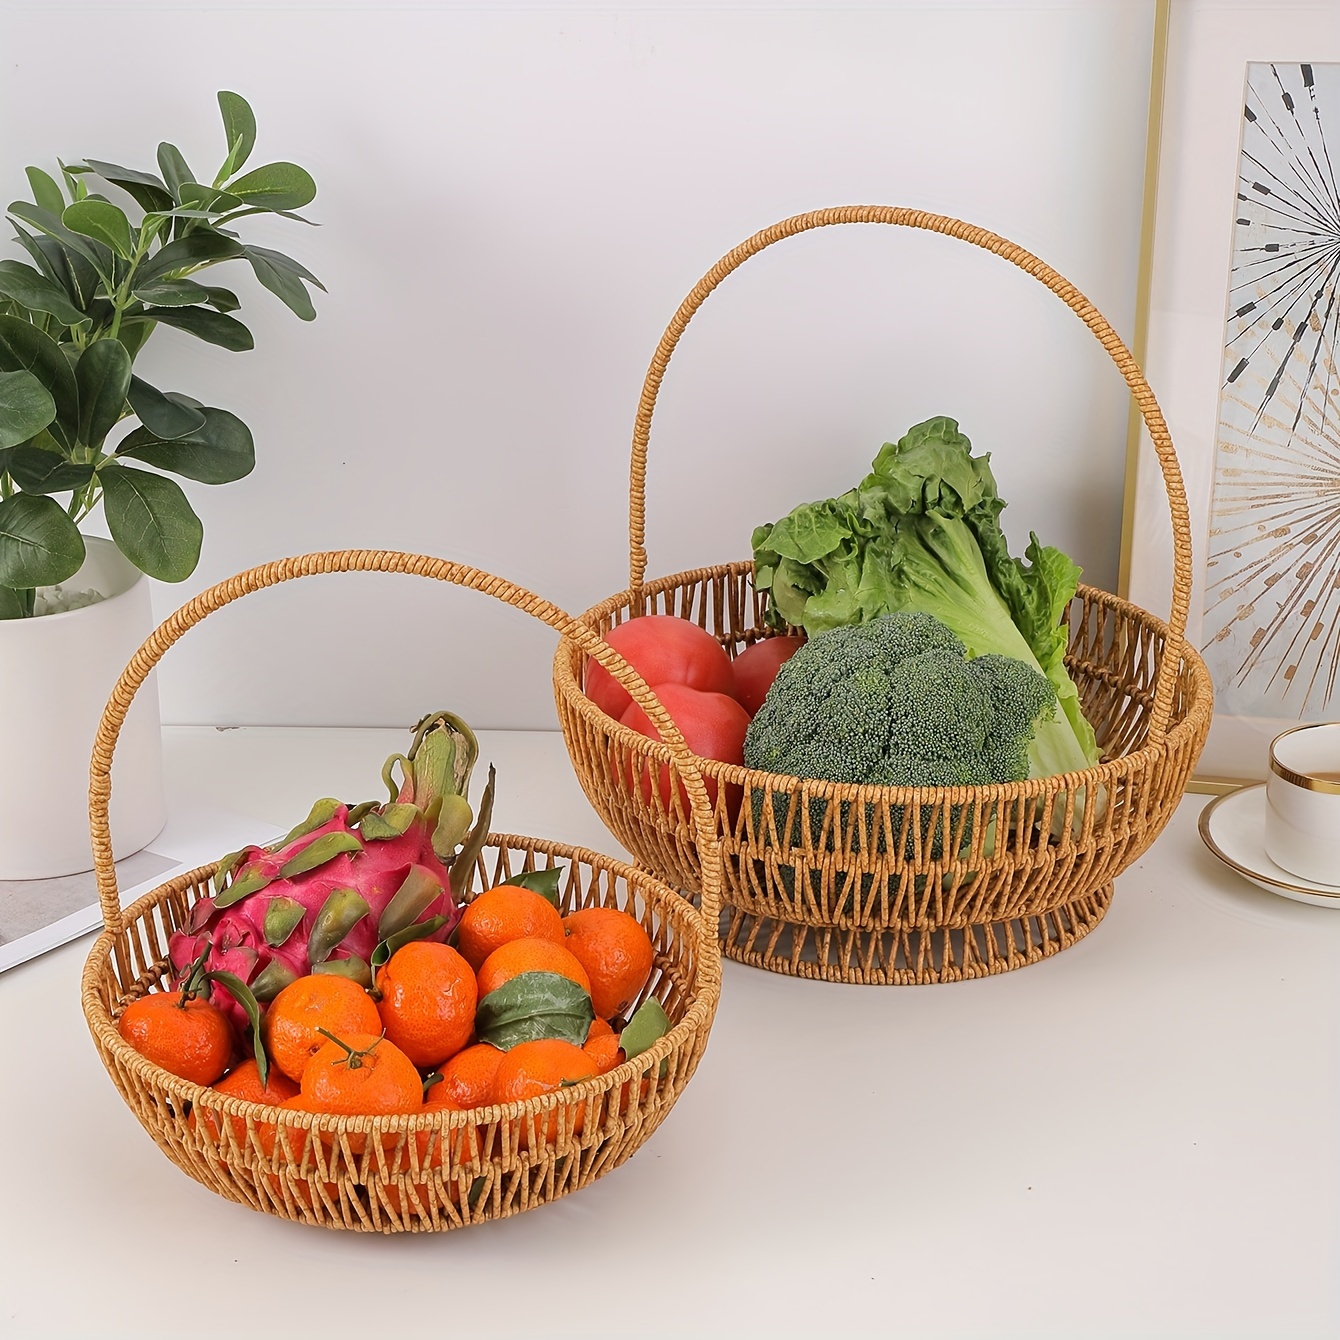 Picnic baskets. Wicker containers with fruit, vegetables, bread